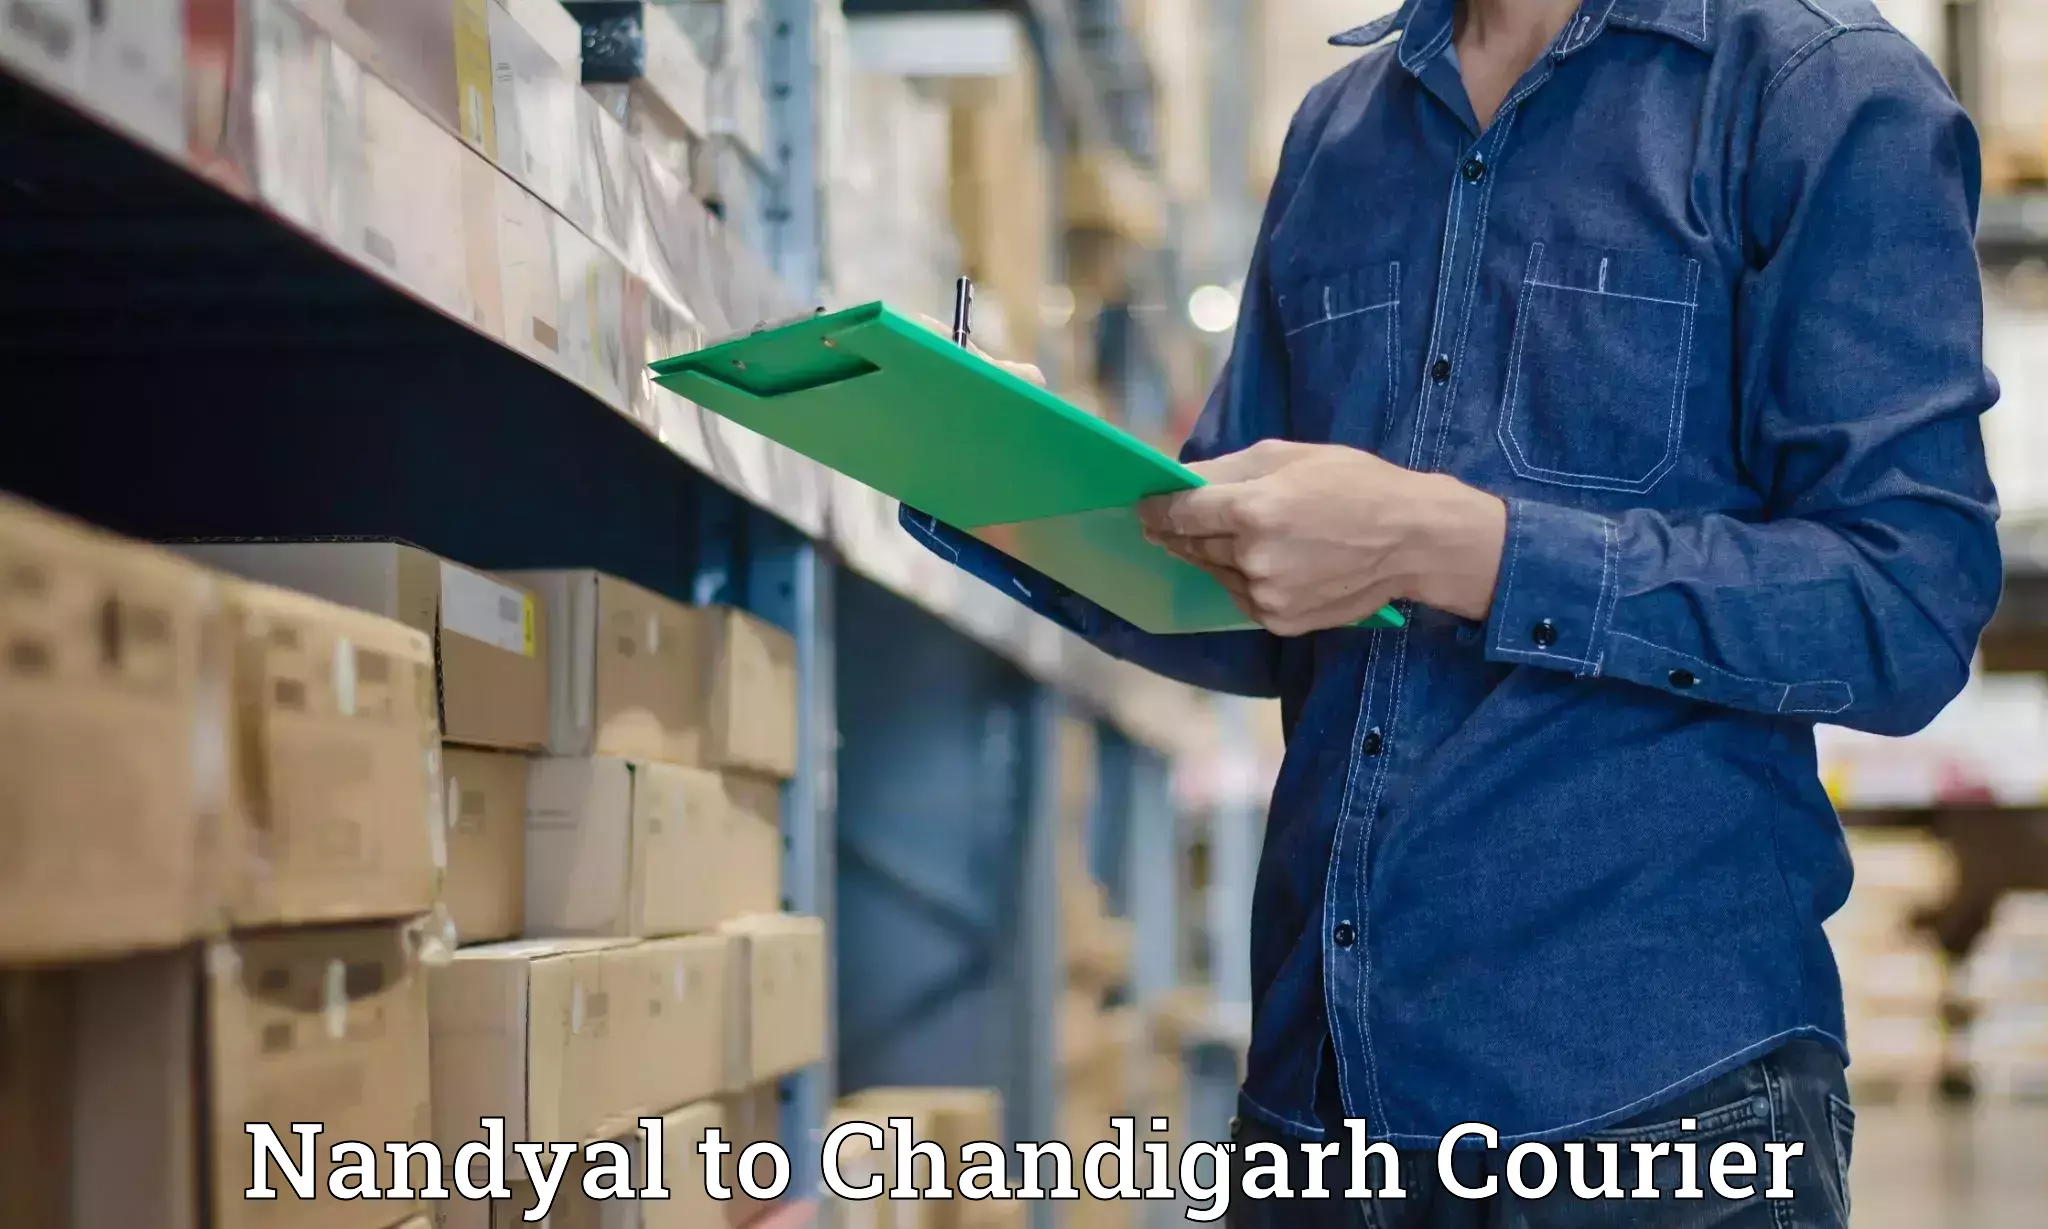 Reliable courier service Nandyal to Chandigarh